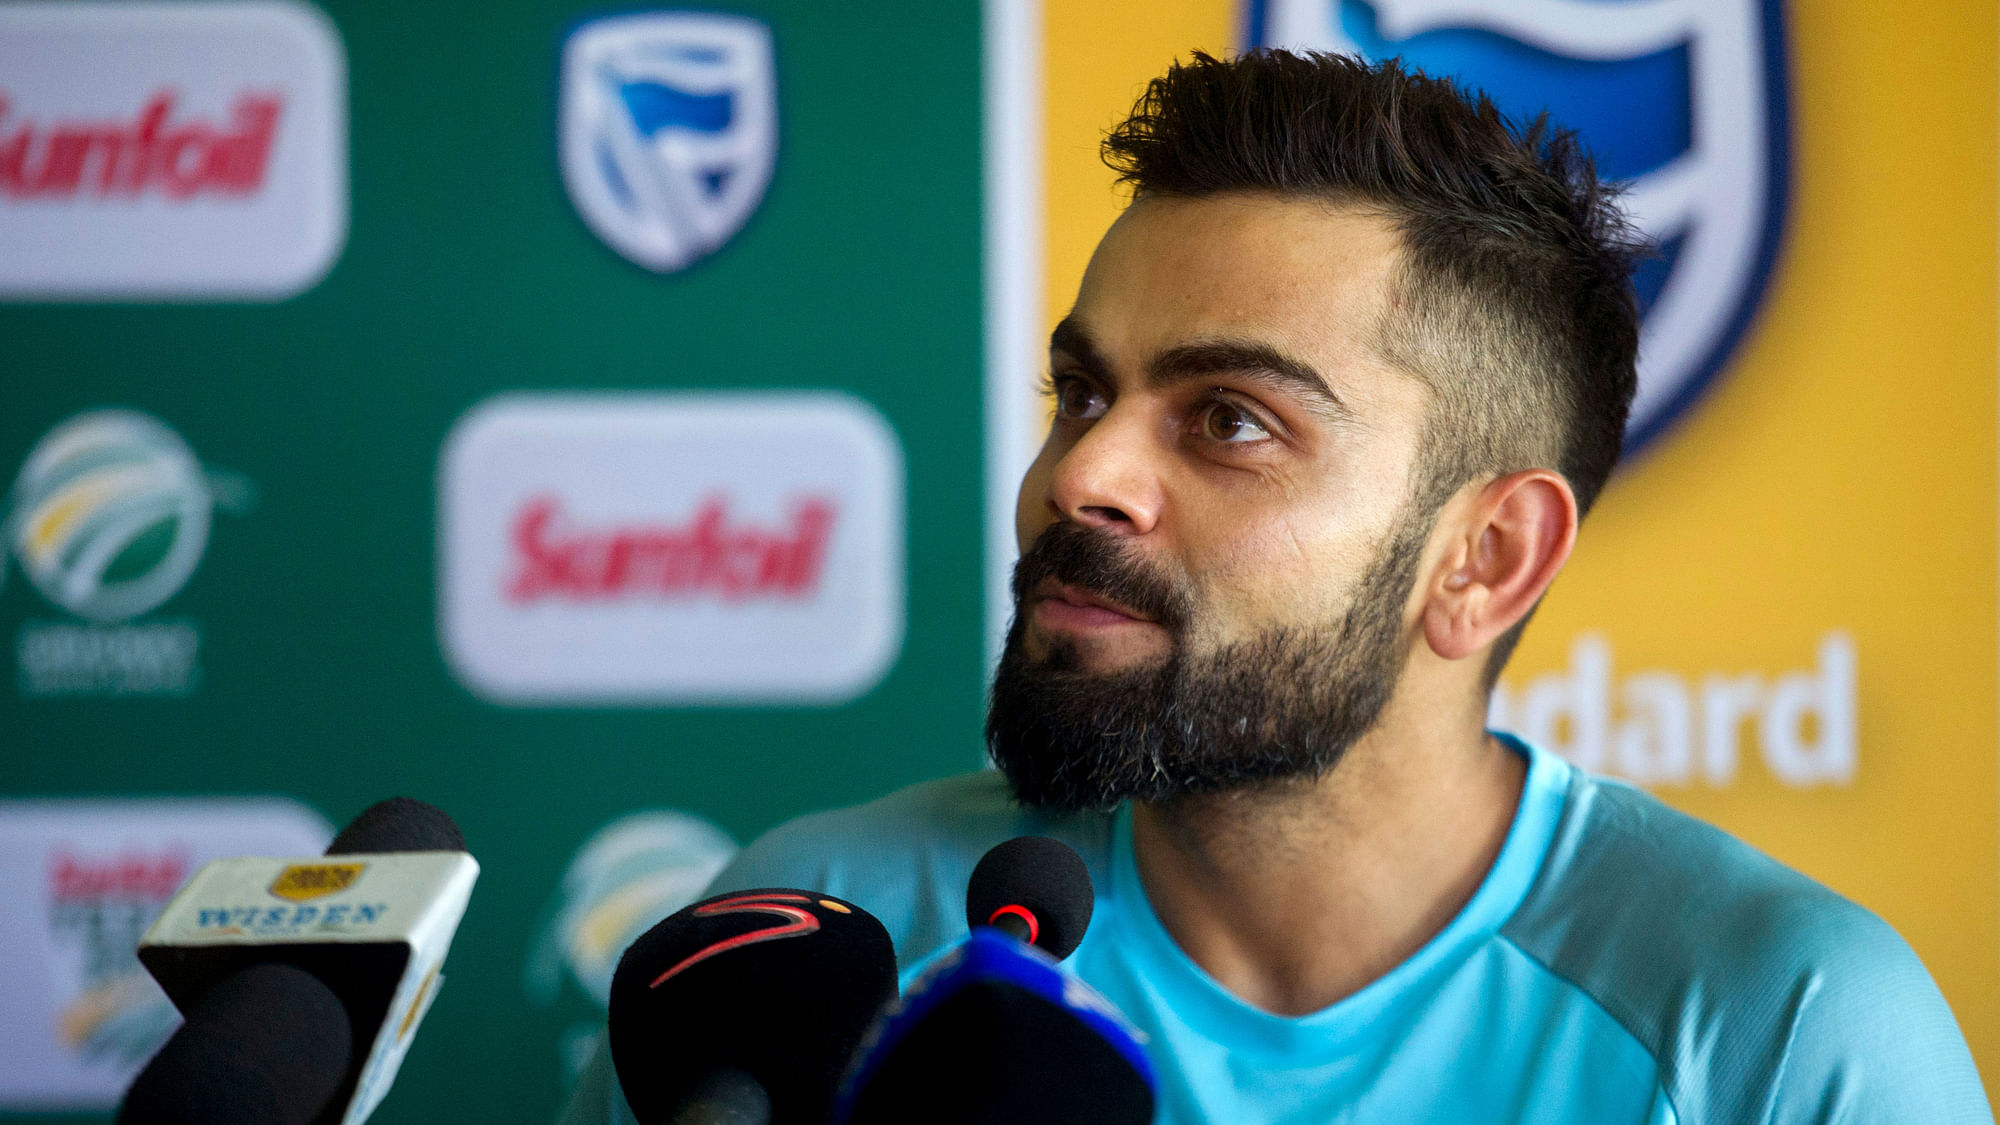 Virat Kohli addressed the media after India lost the first Test to South Africa.